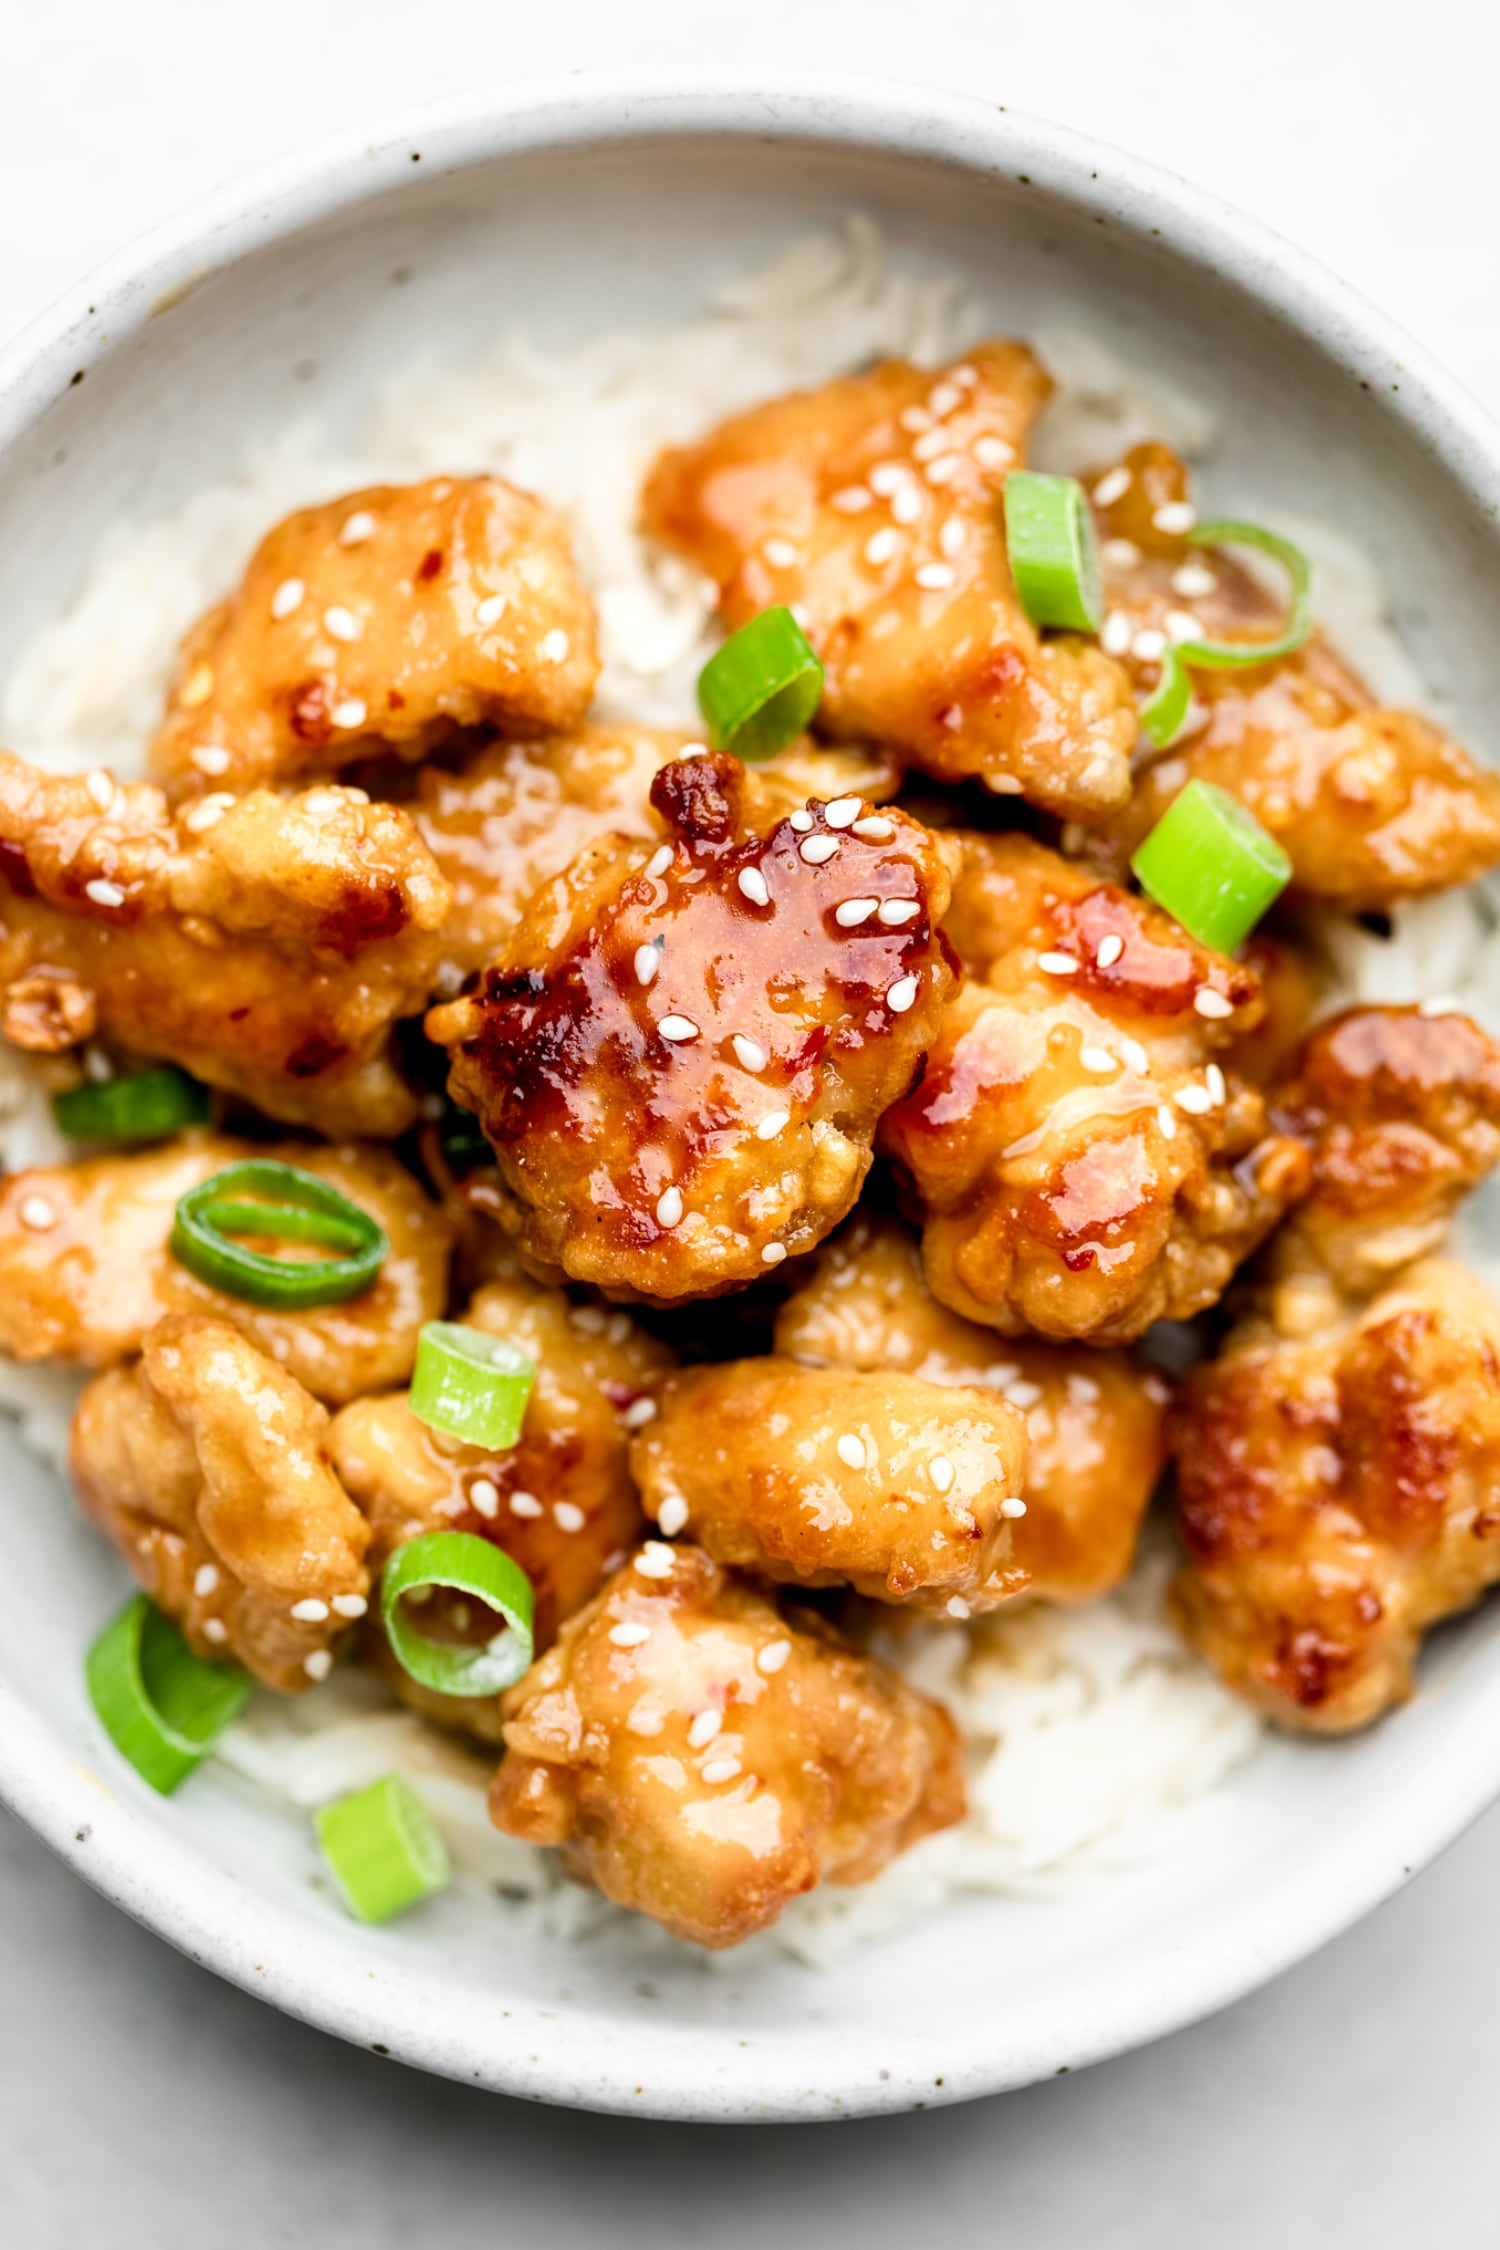 Orange chicken pieces in a bowl over rice.